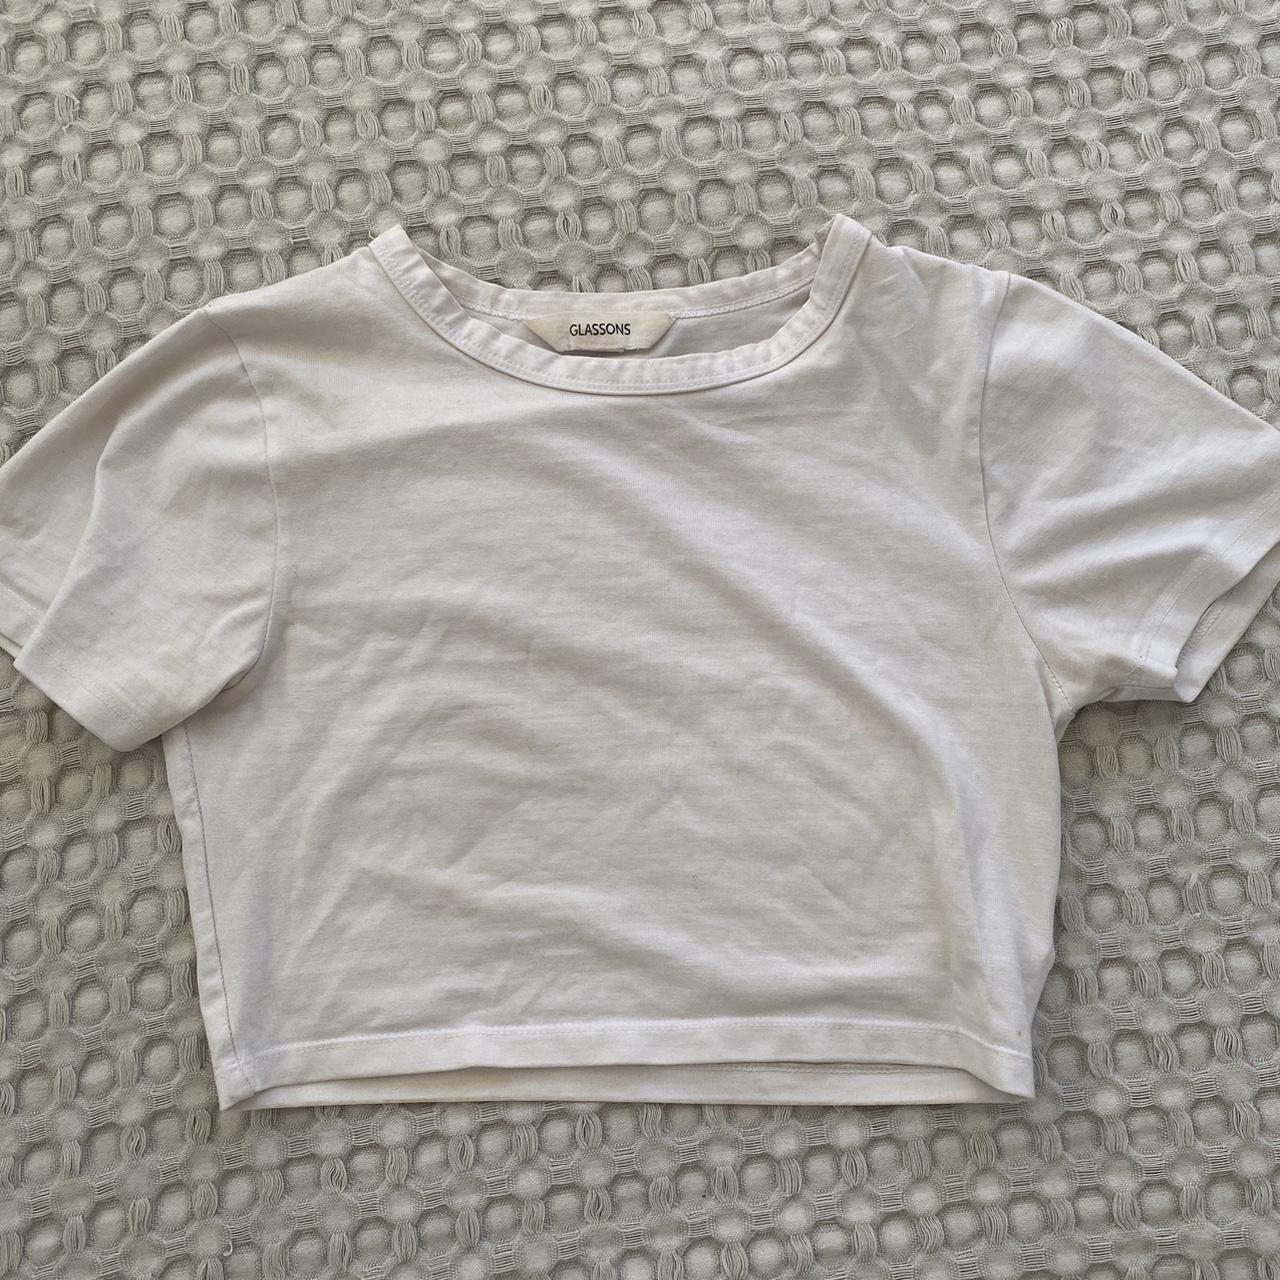 glassons staple baby tee each for $15 both for $20 - Depop